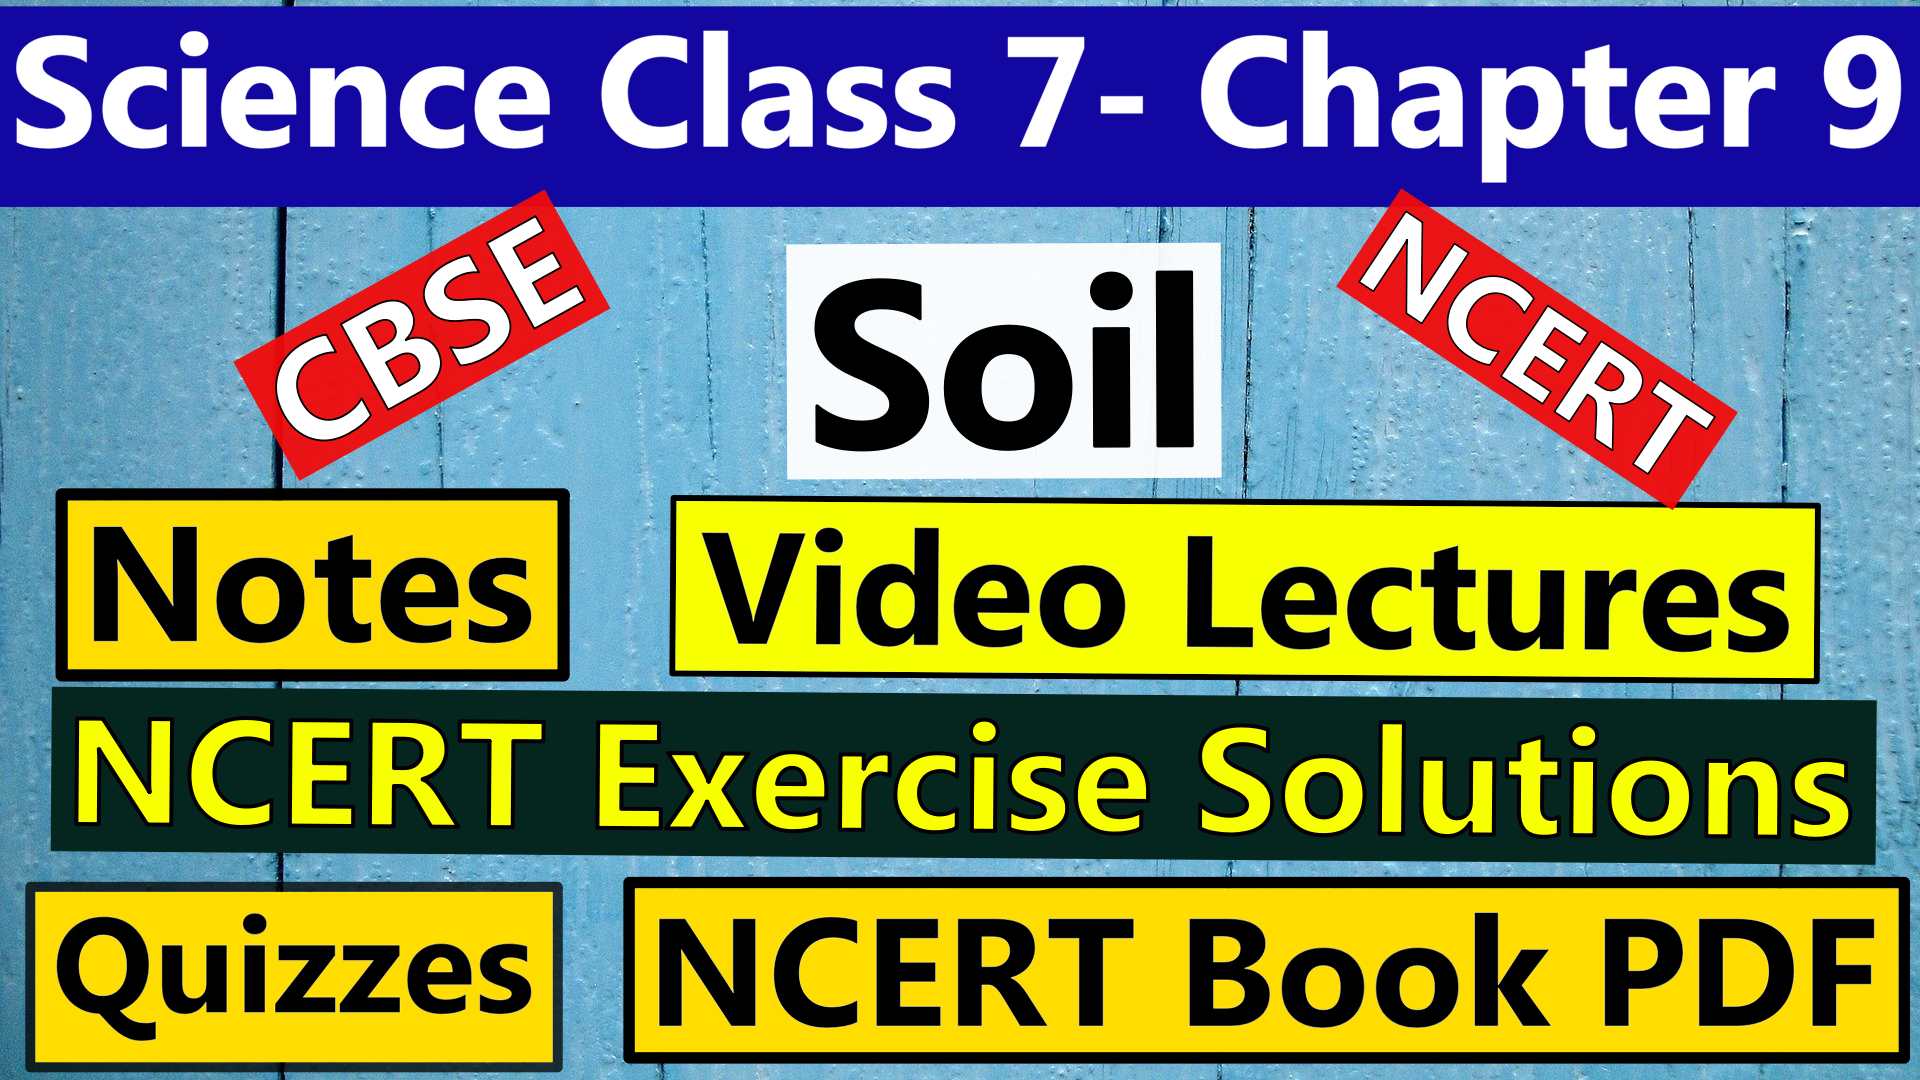 CBSE Science Class 7 - Chapter 9 - Soil - Notes, Video Lecture, NCERT Exercise Solution, Quizzes, NCERT Book Chapter 9 PDF Download, or view